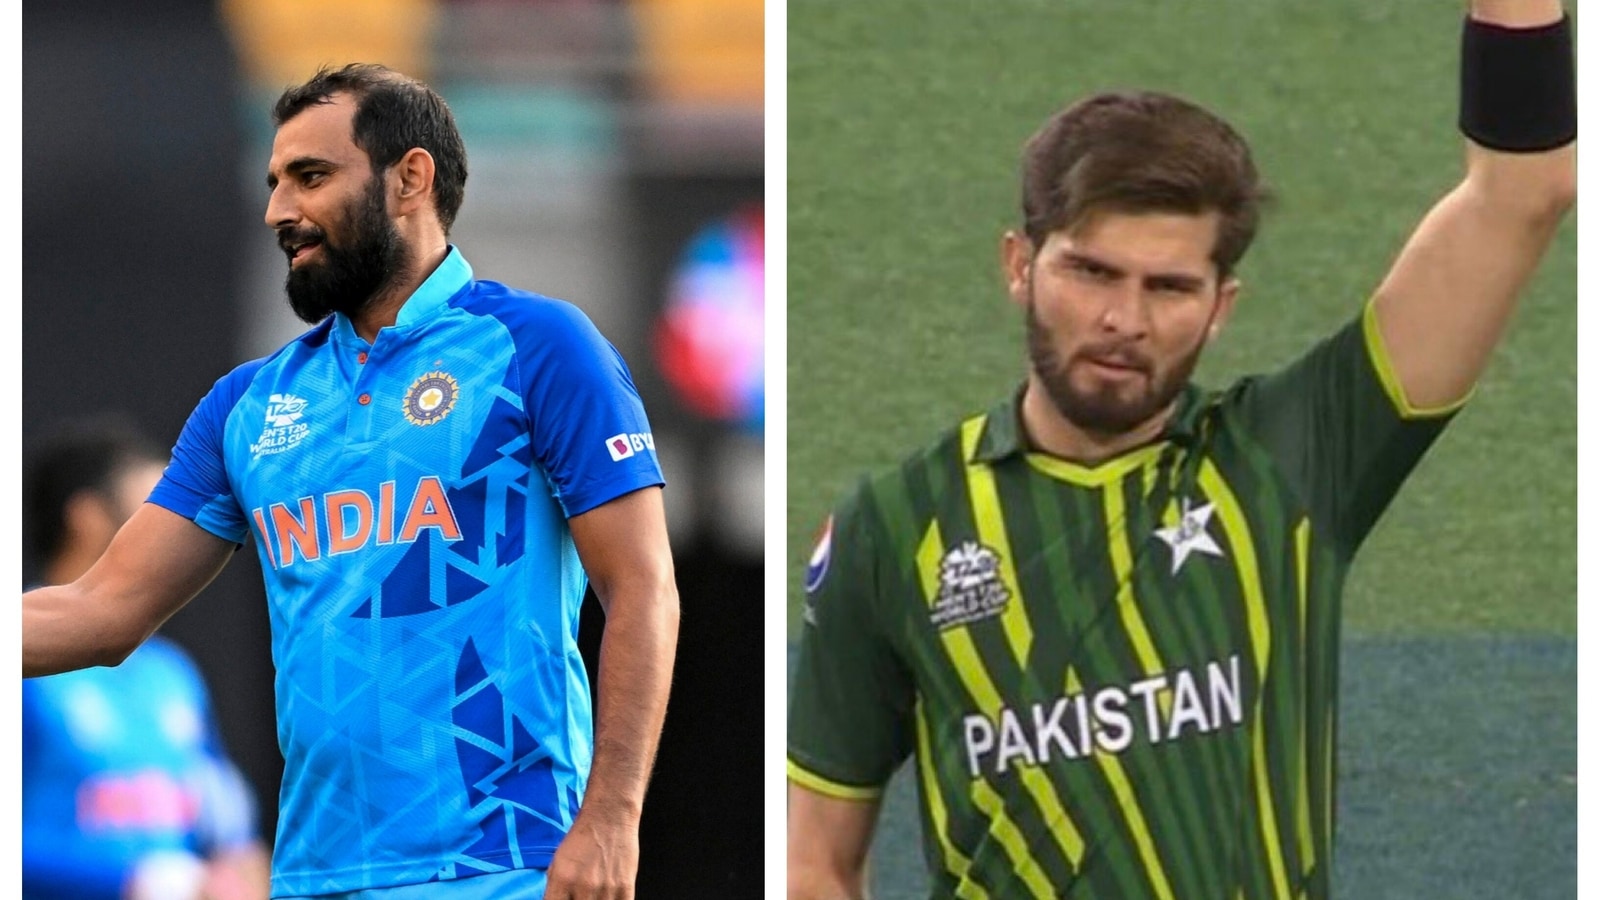 no-comparison-between-mohammed-shami-and-shaheen-shah-afridi-kapil-dev-says-pakistan-pacer-miles-ahead